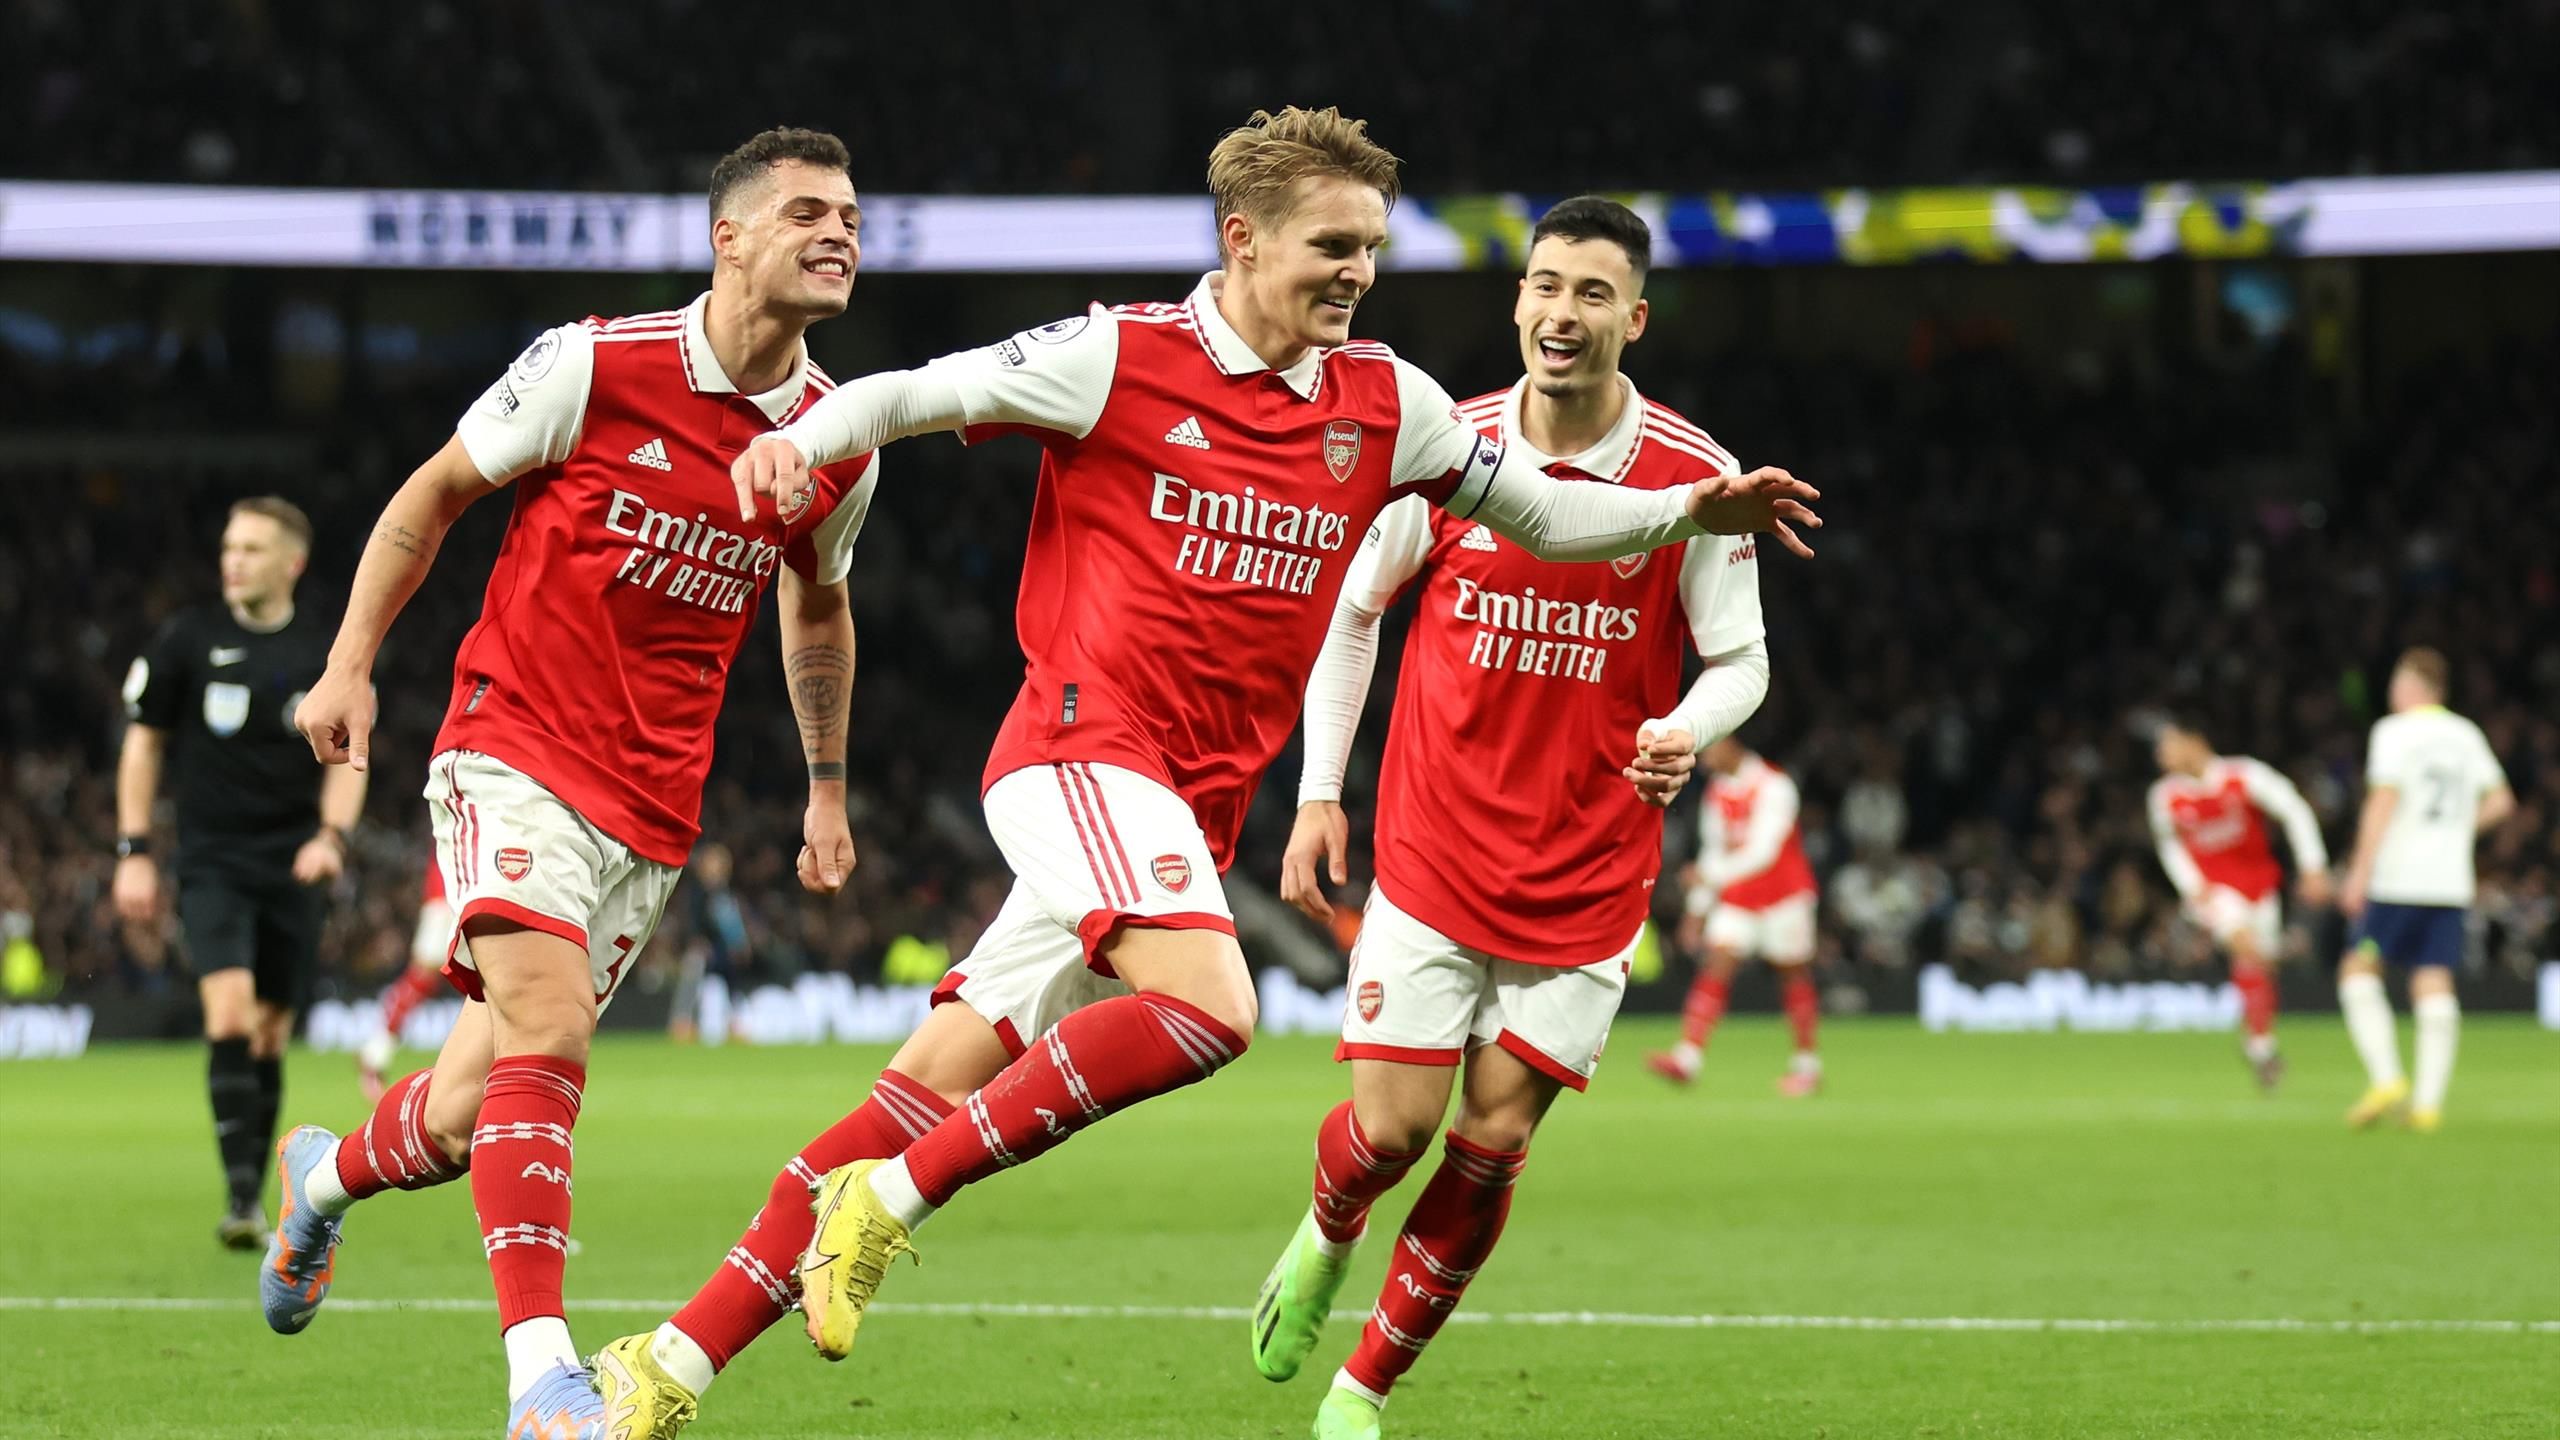 Tottenham 0-2 Arsenal Gunners outclass Spurs to go eight points clear in Premier League title race